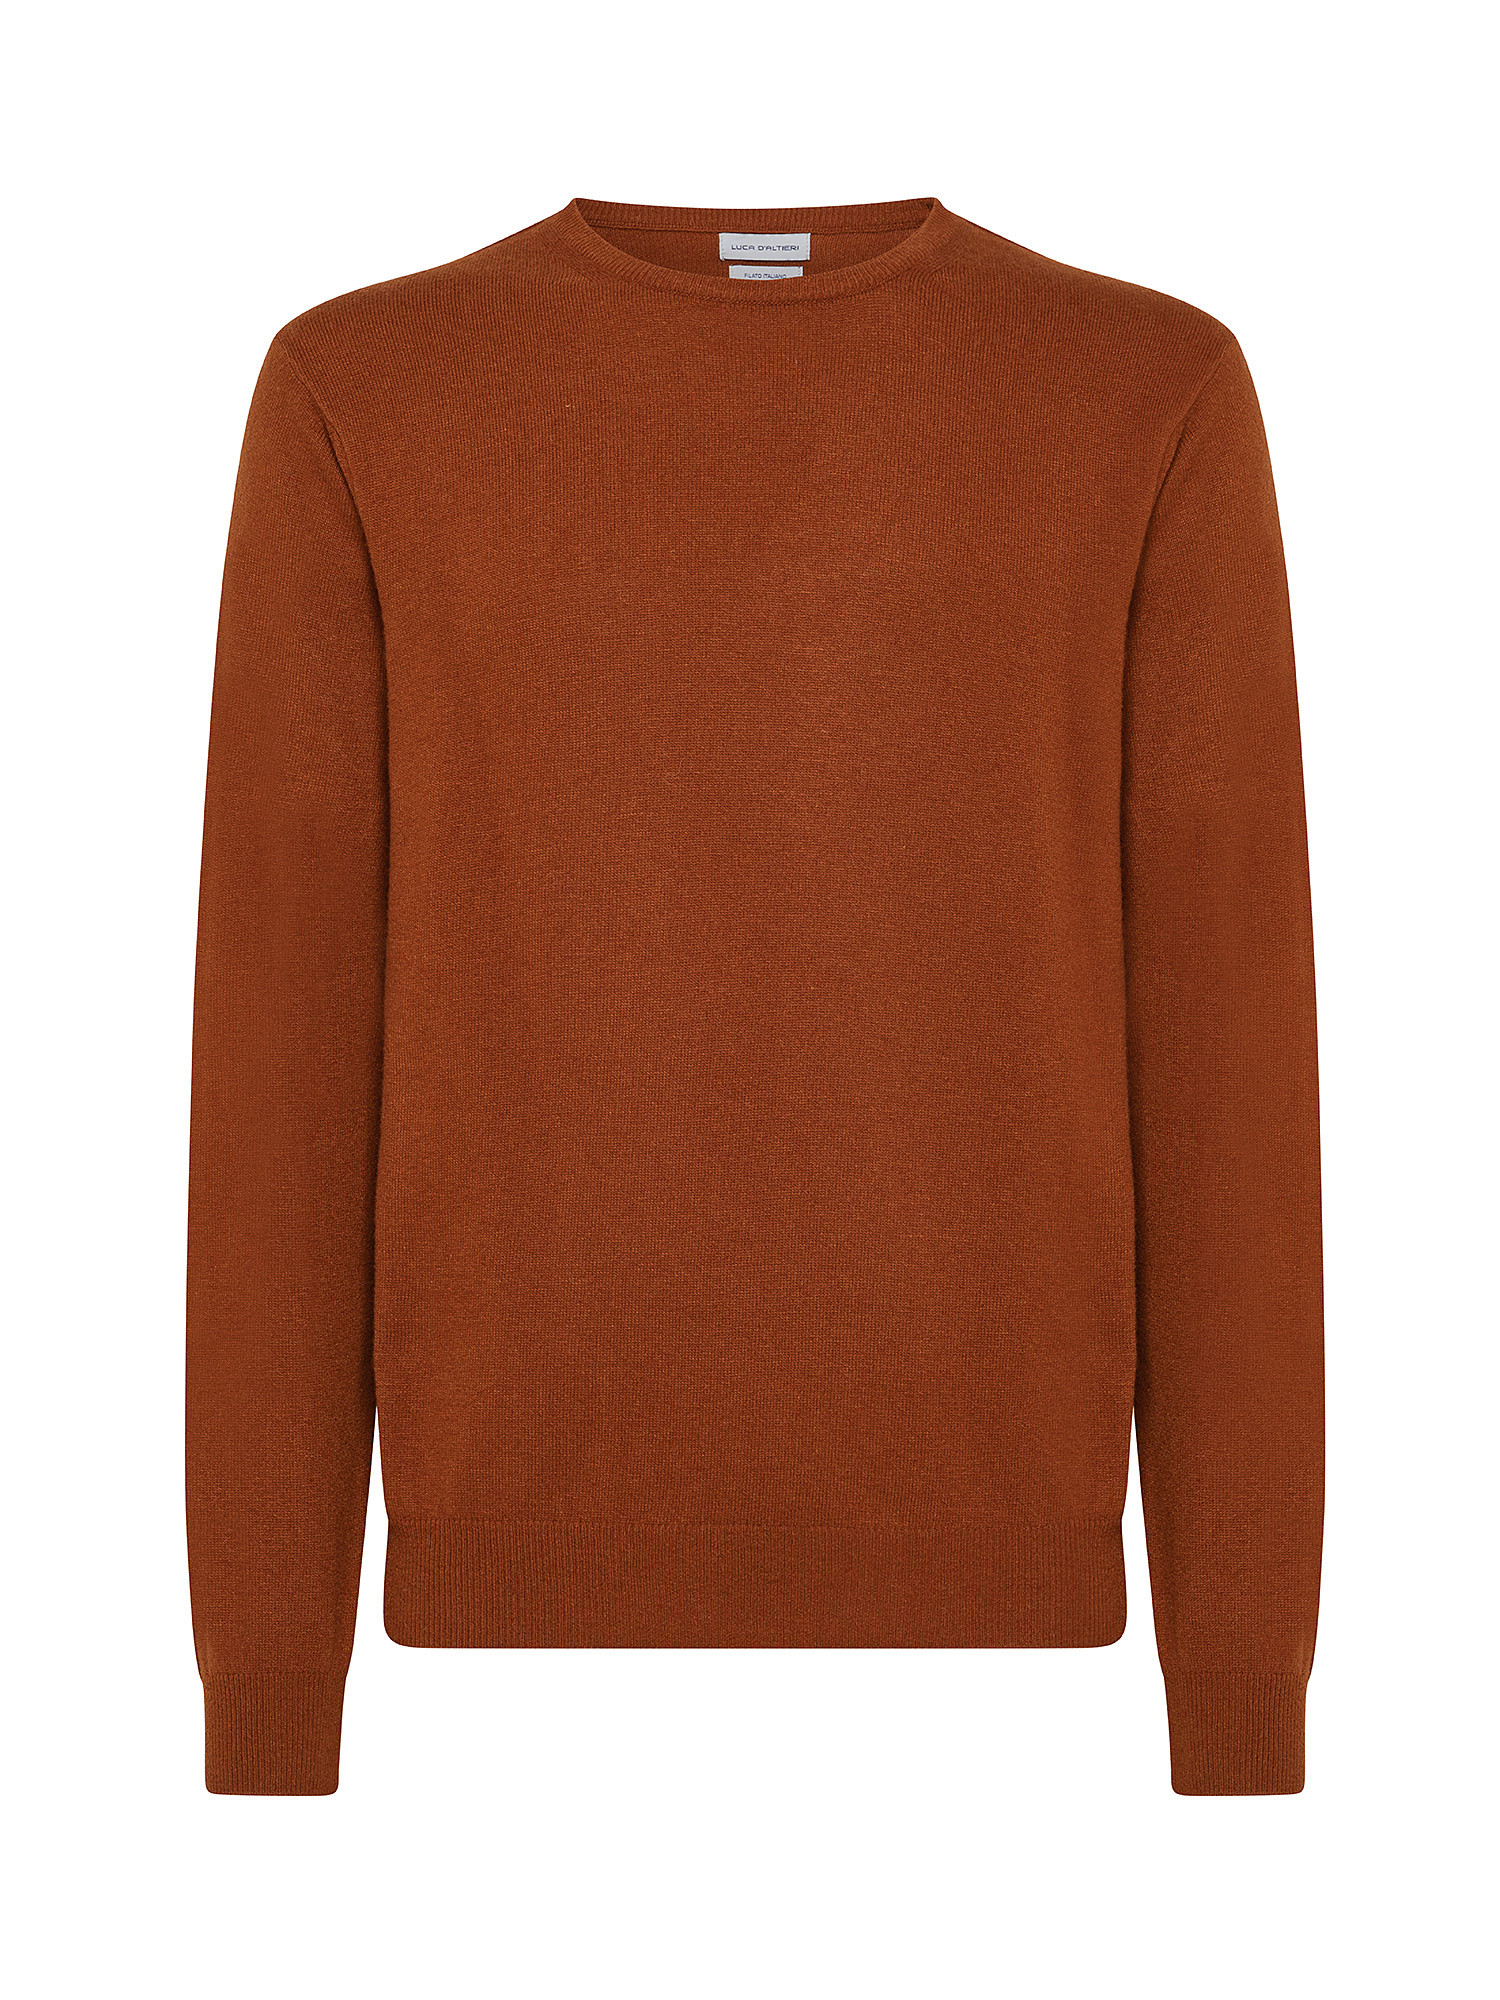 Cashmere Blend crewneck sweater with noble fibers, Copper Brown, large image number 0